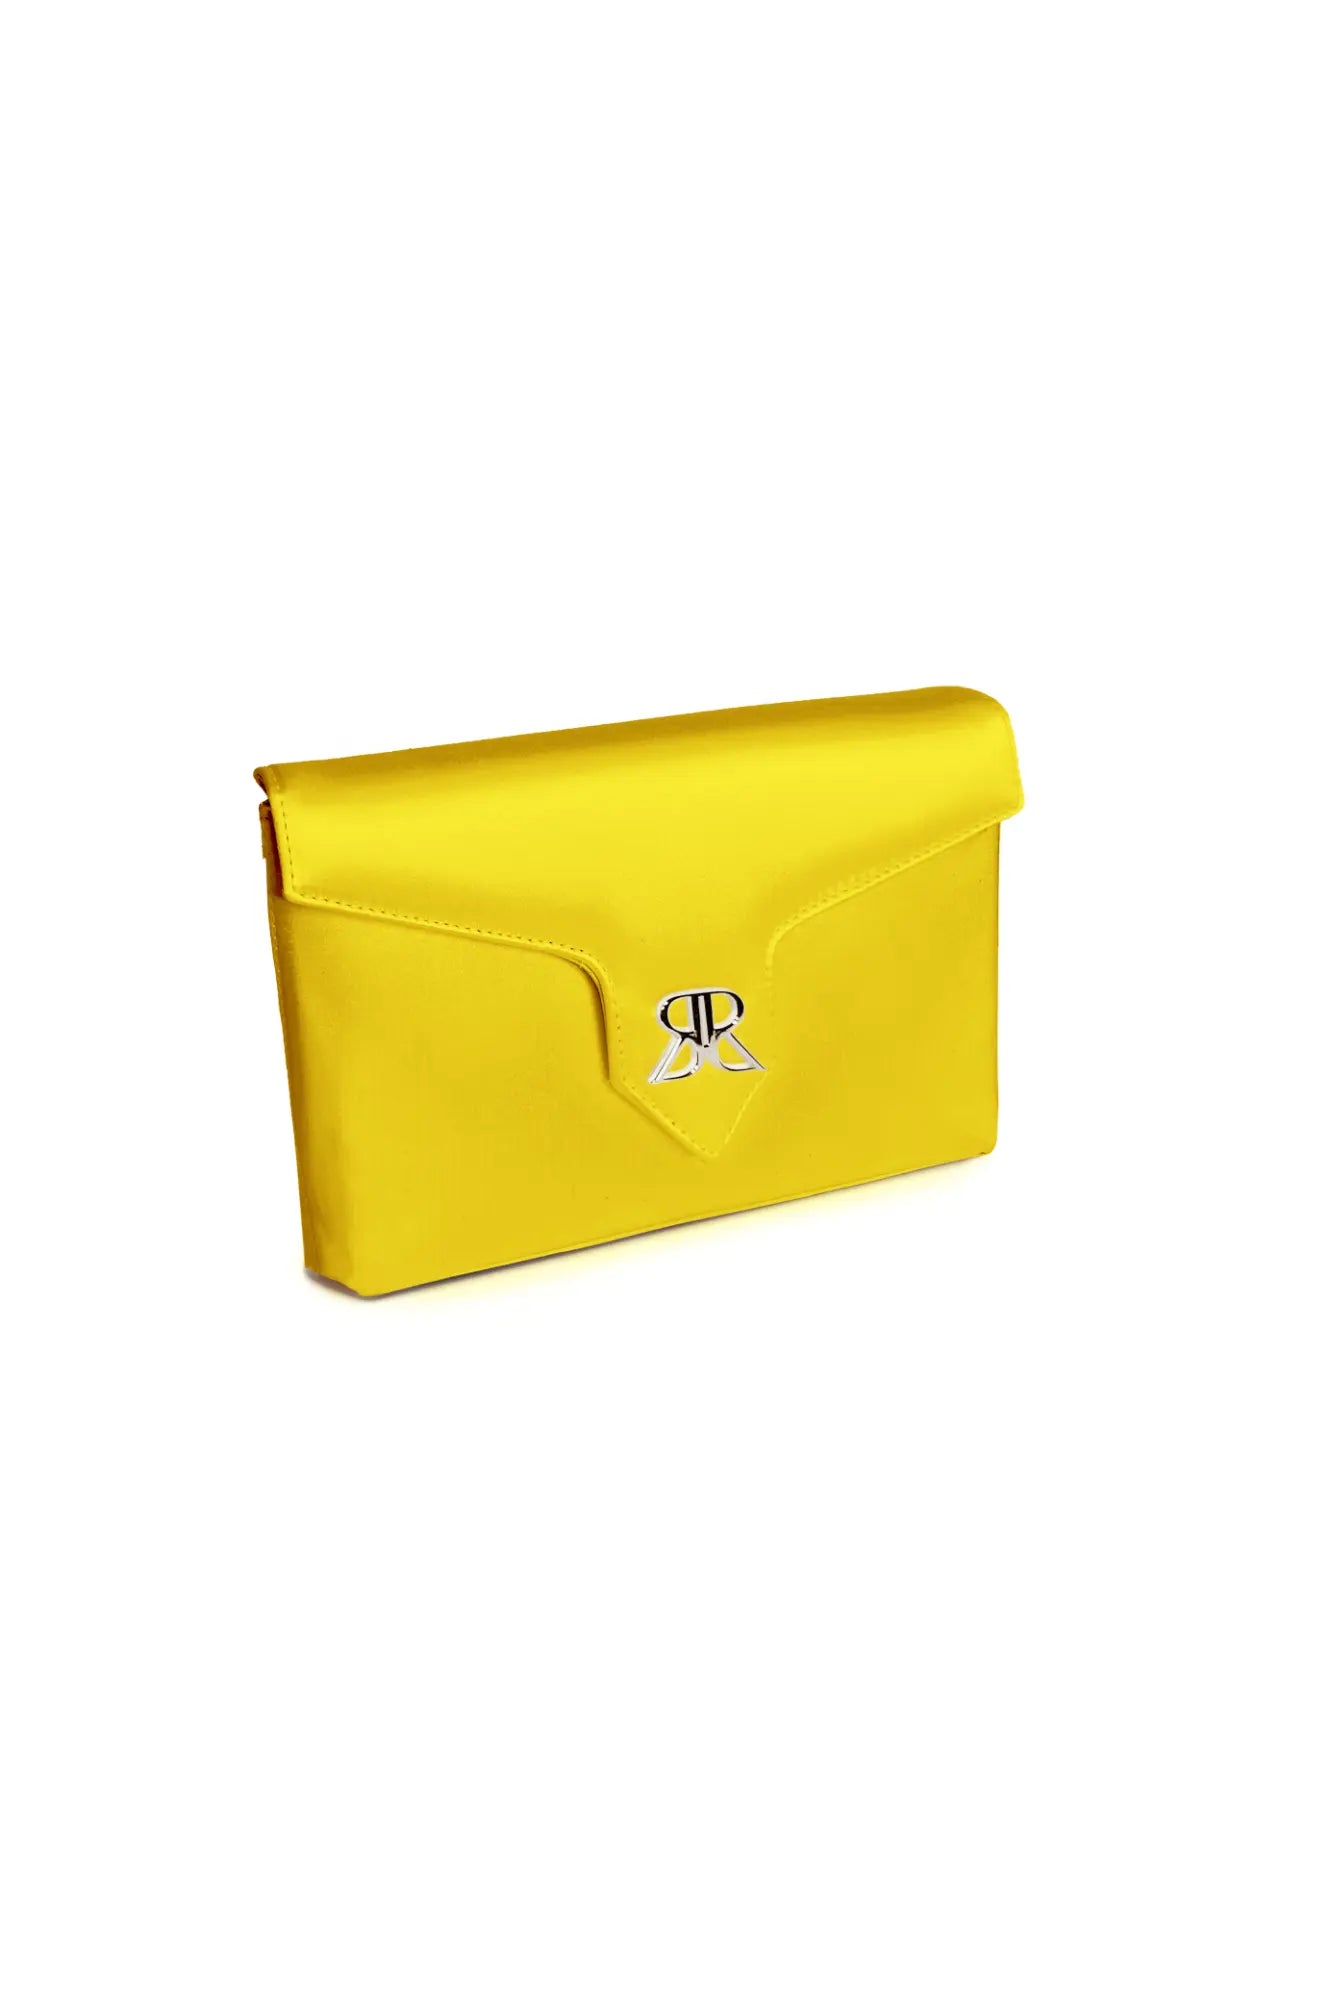 Bright yellow Love Note Envelope Clutch Limoncello Yellow with a metallic clasp against a white background.